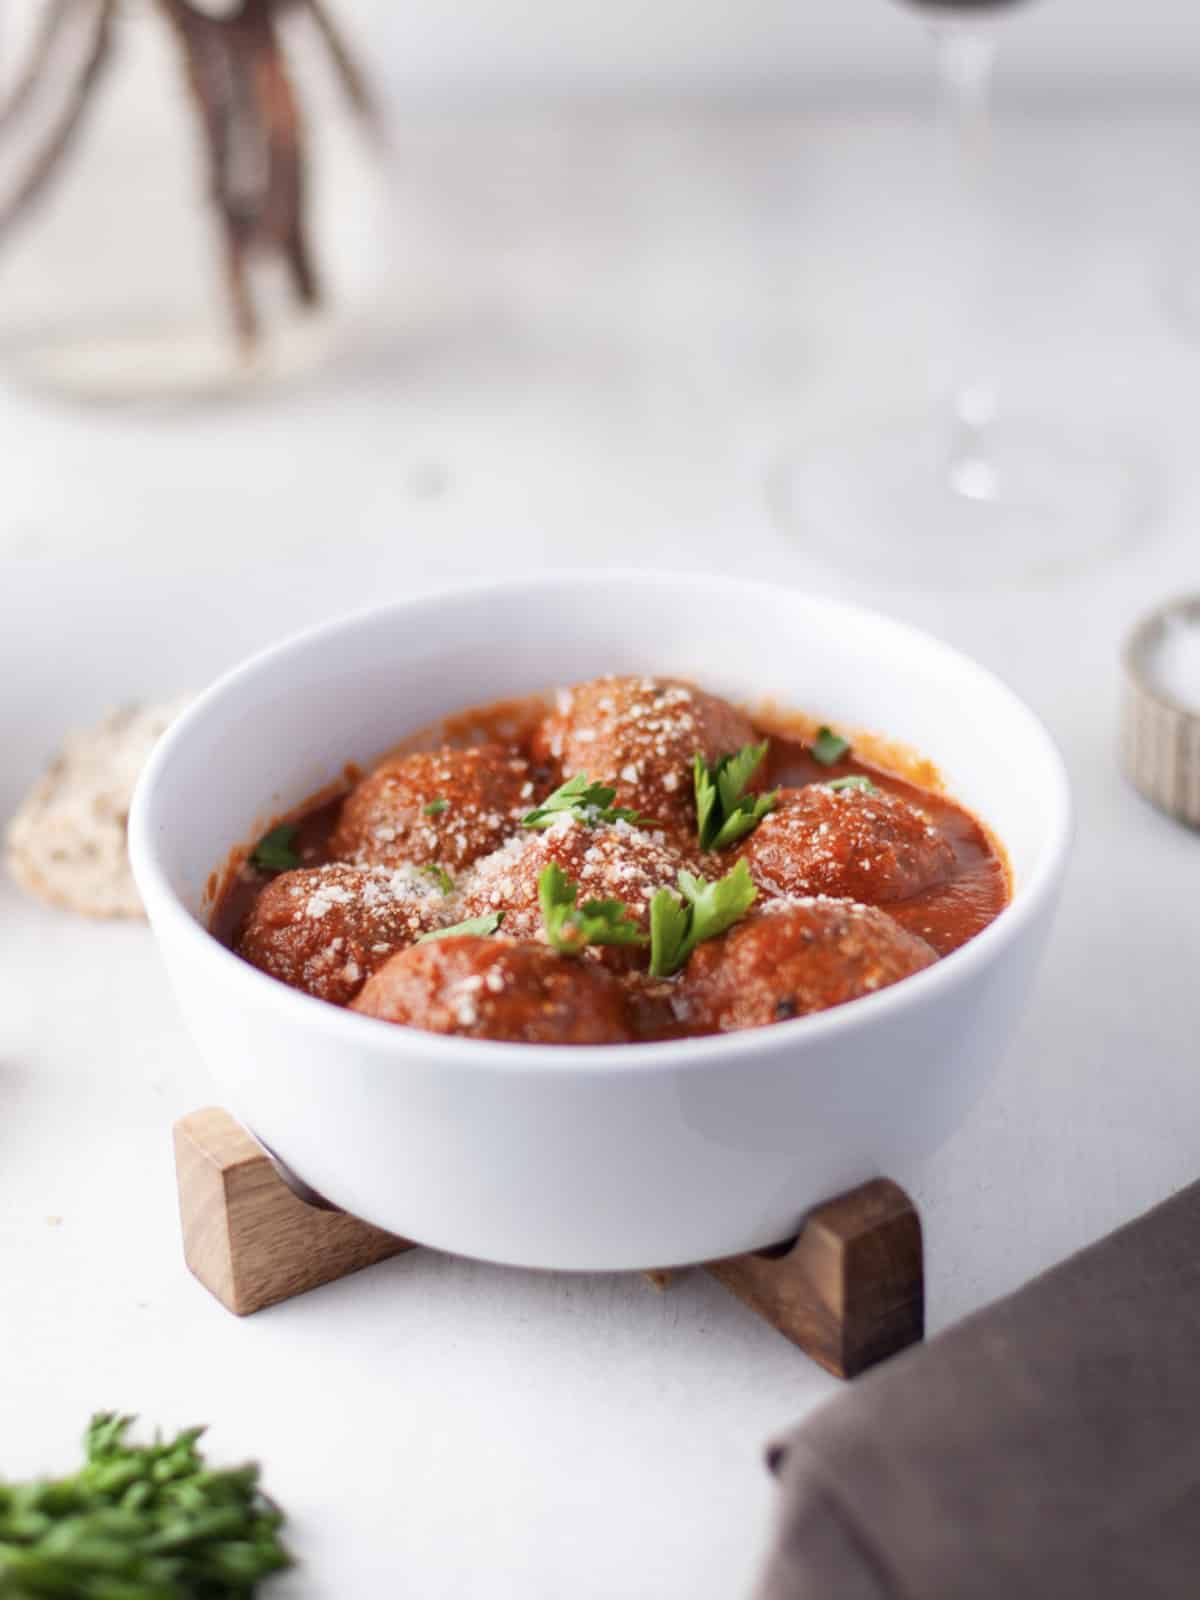 Spicy chipotle meatballs served in a bowl.